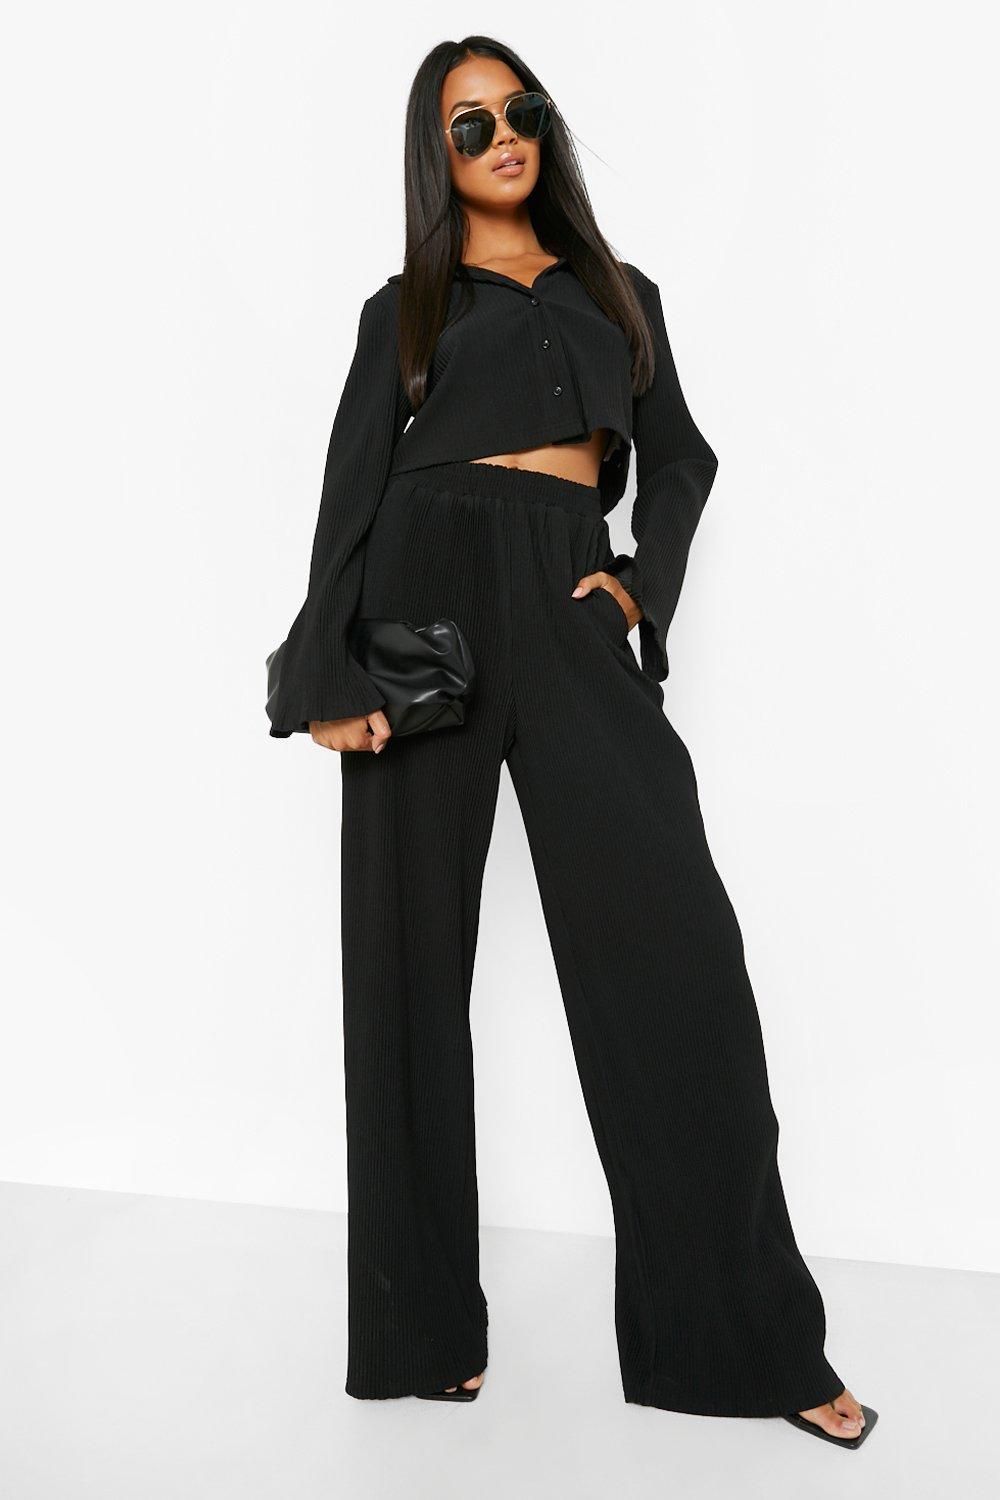 Madison Beer Plisse Rib Button Shirt & Trouser Co-Ord | Boohoo.com (UK & IE)